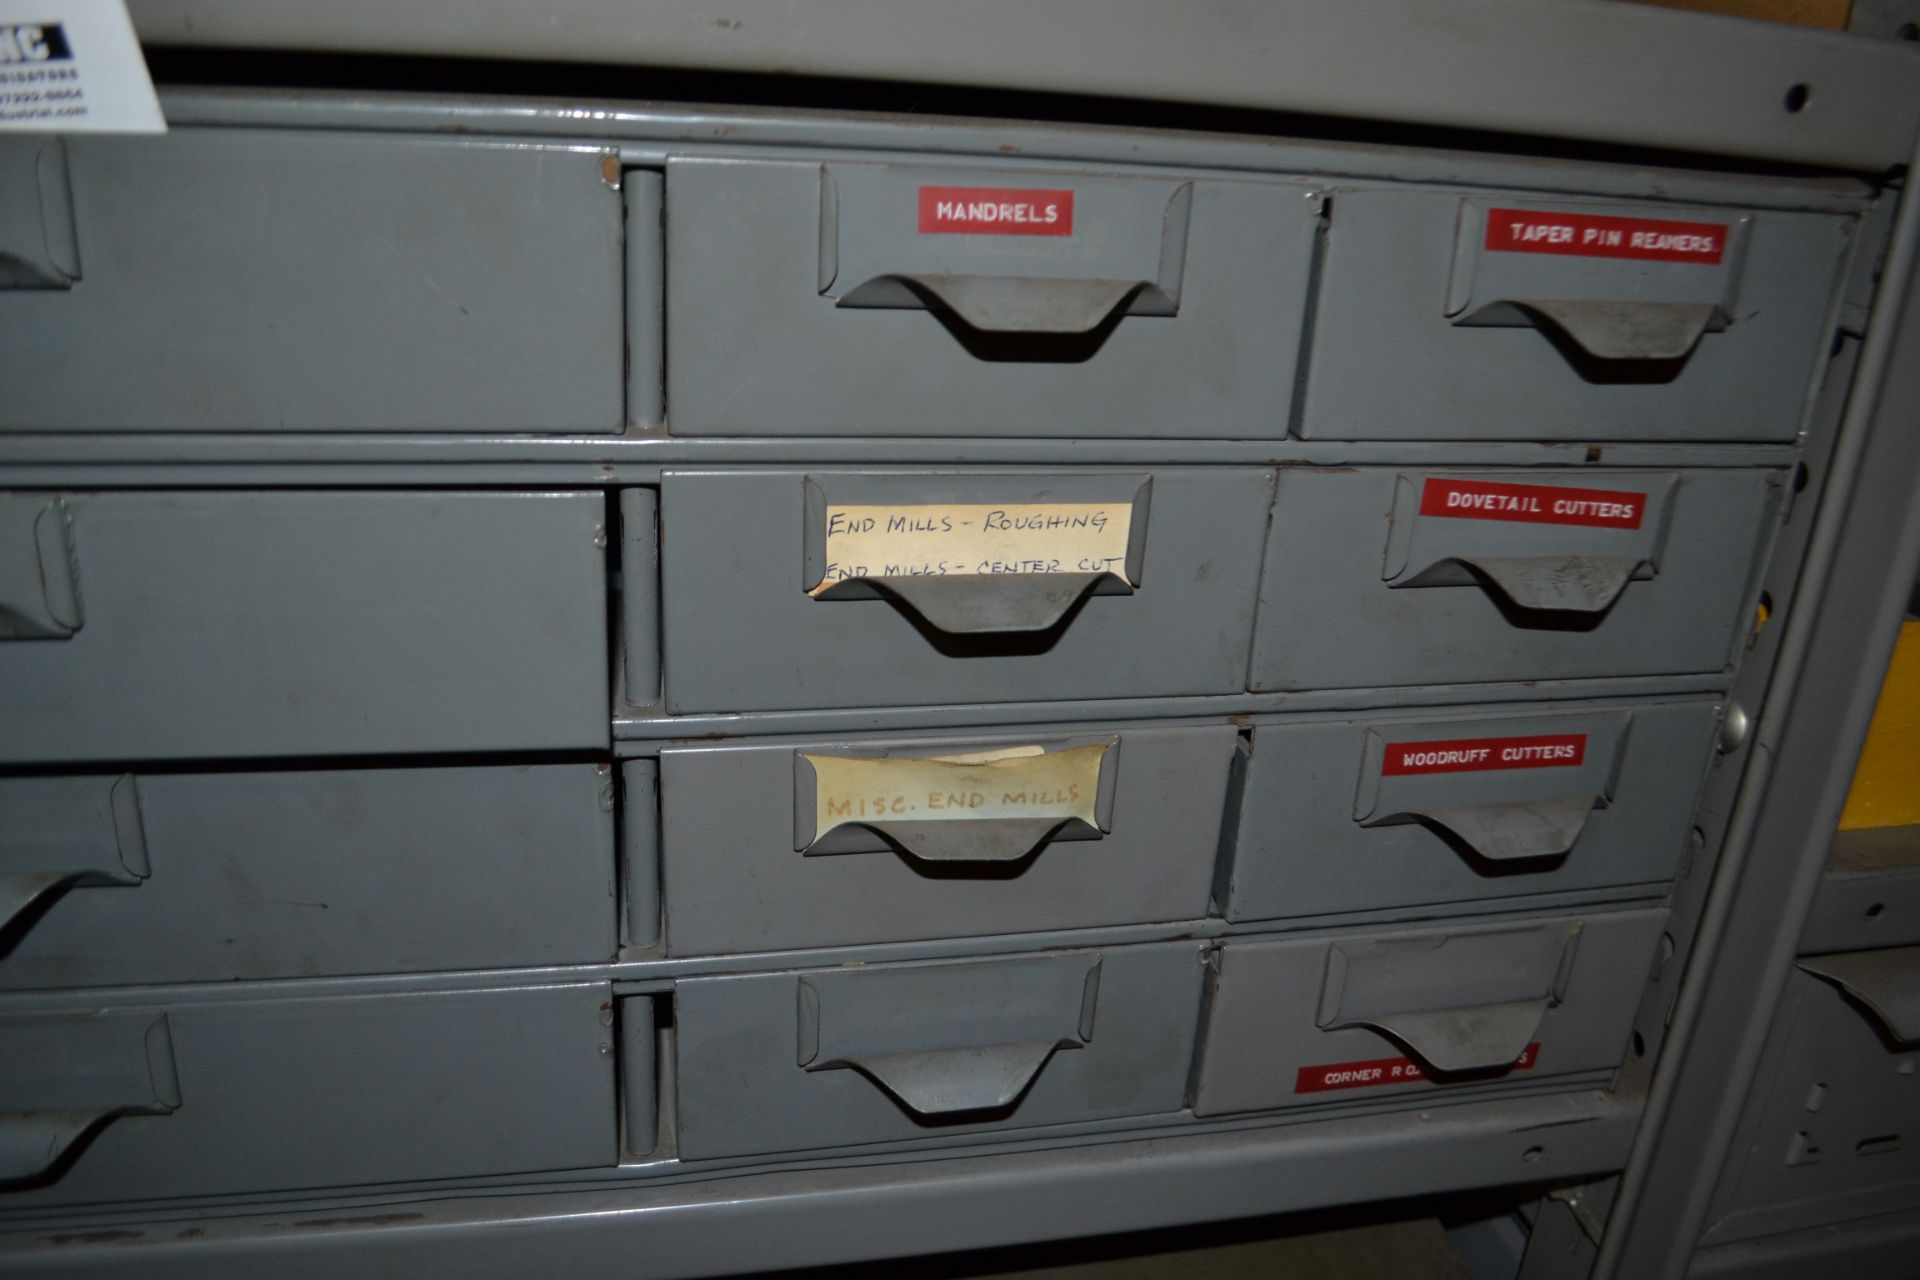 Hardware 16 drawer with Mandrels, reamers, cutters, end mills, etc. - Image 4 of 4